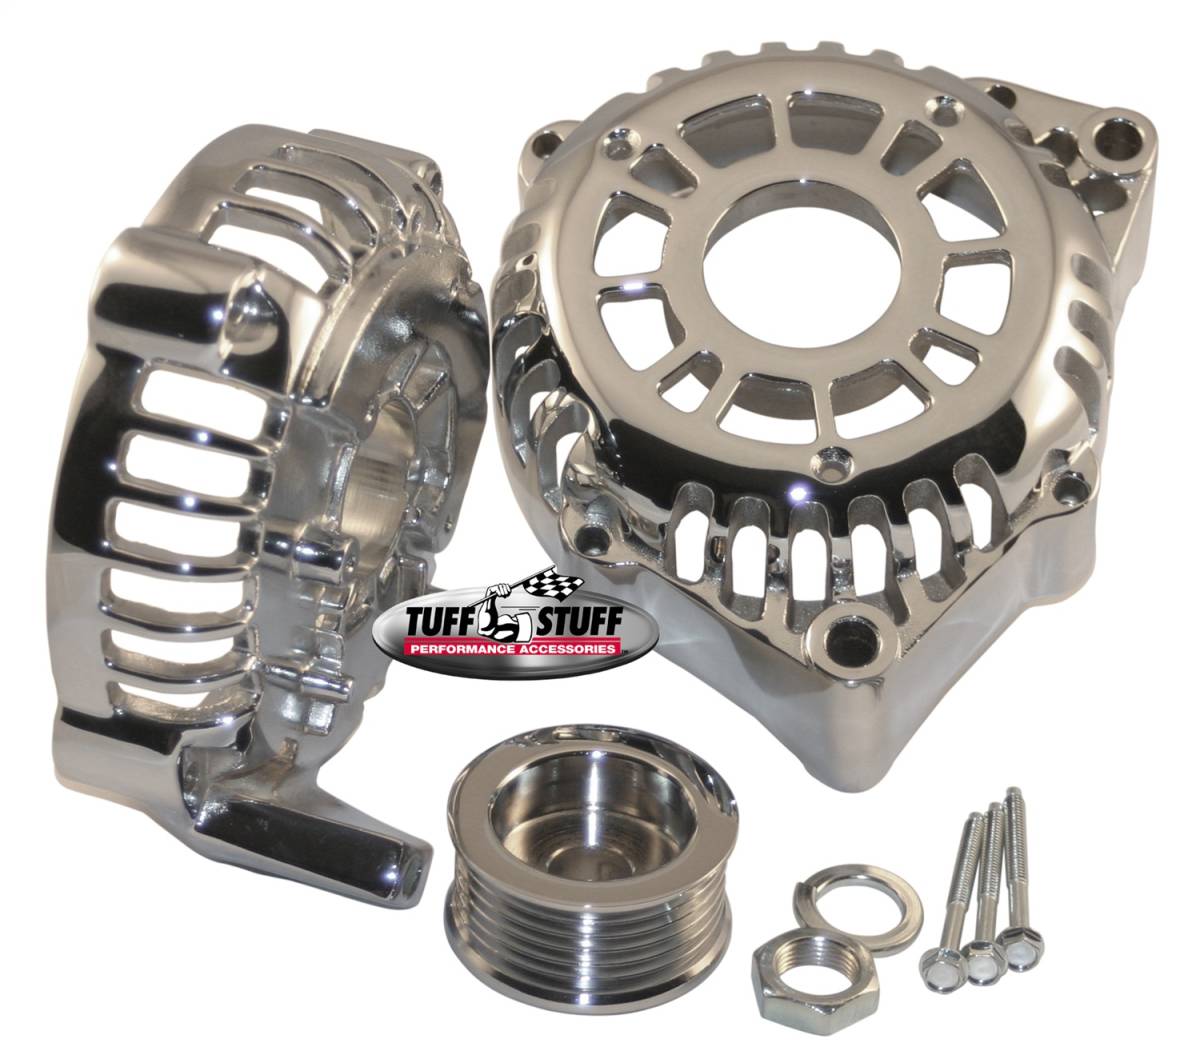 Tuff Stuff Performance - Alternator Case Kit Fits GM CS130D w/6 Groove Pulley And Tuff Stuff Alternator PN[8206] Incl. Front And Rear Housings/Fan/Pulley/Nut/Lockwashers/Thru Bolts Chrome Plated 7500L